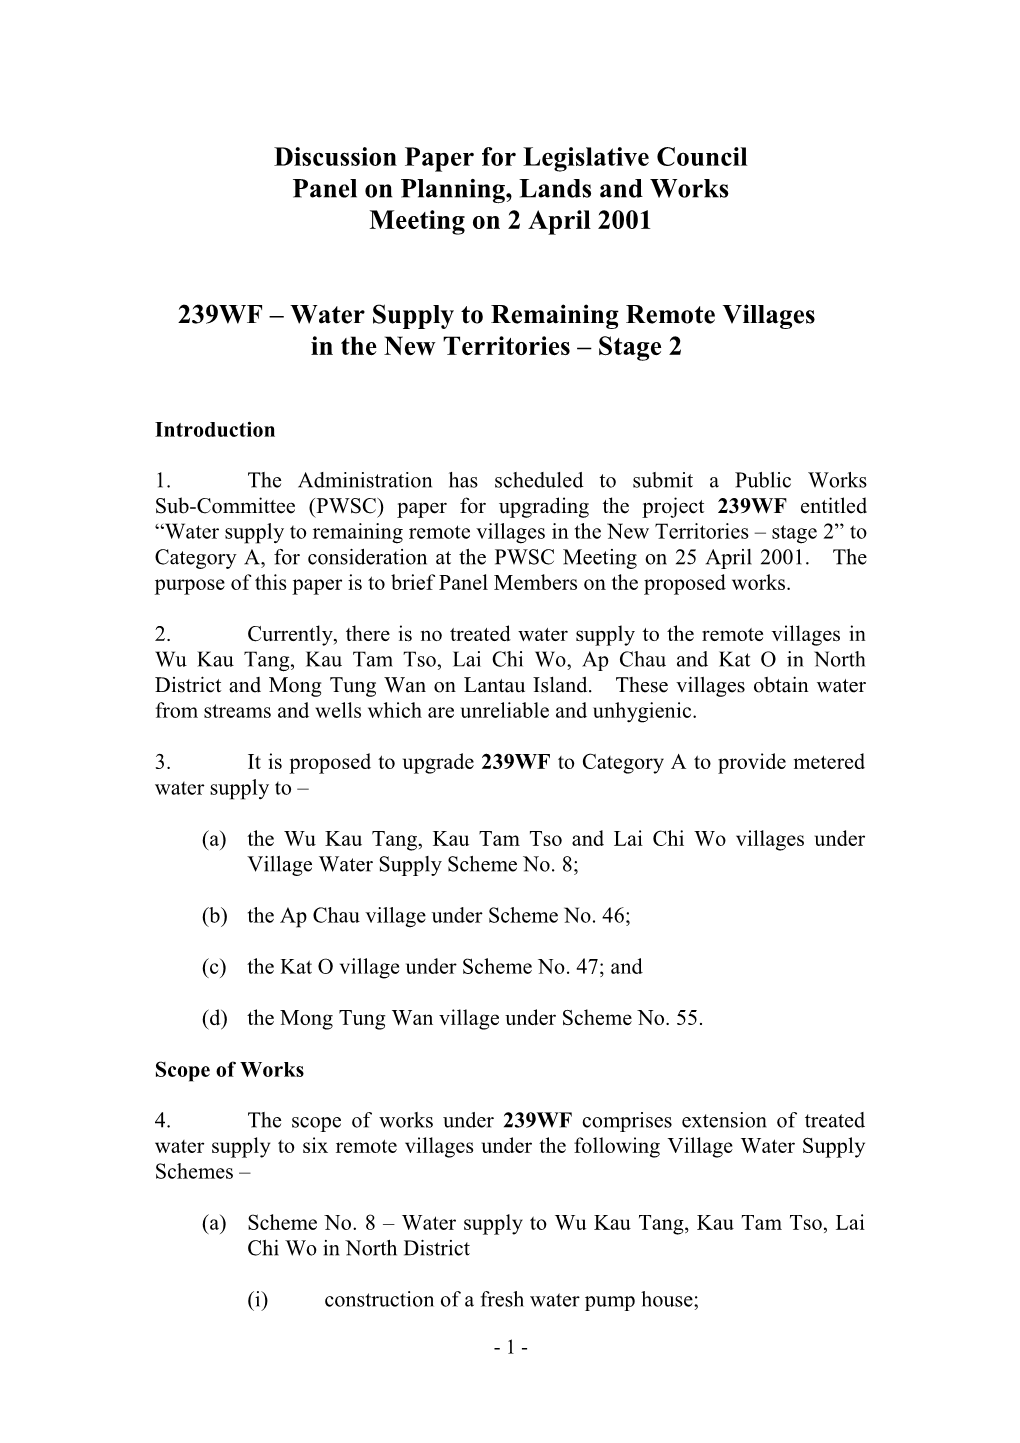 Discussion Paper for Legislative Council Panel on Planning, Lands and Works Meeting on 2 April 2001 239WF – Water Supply to Re